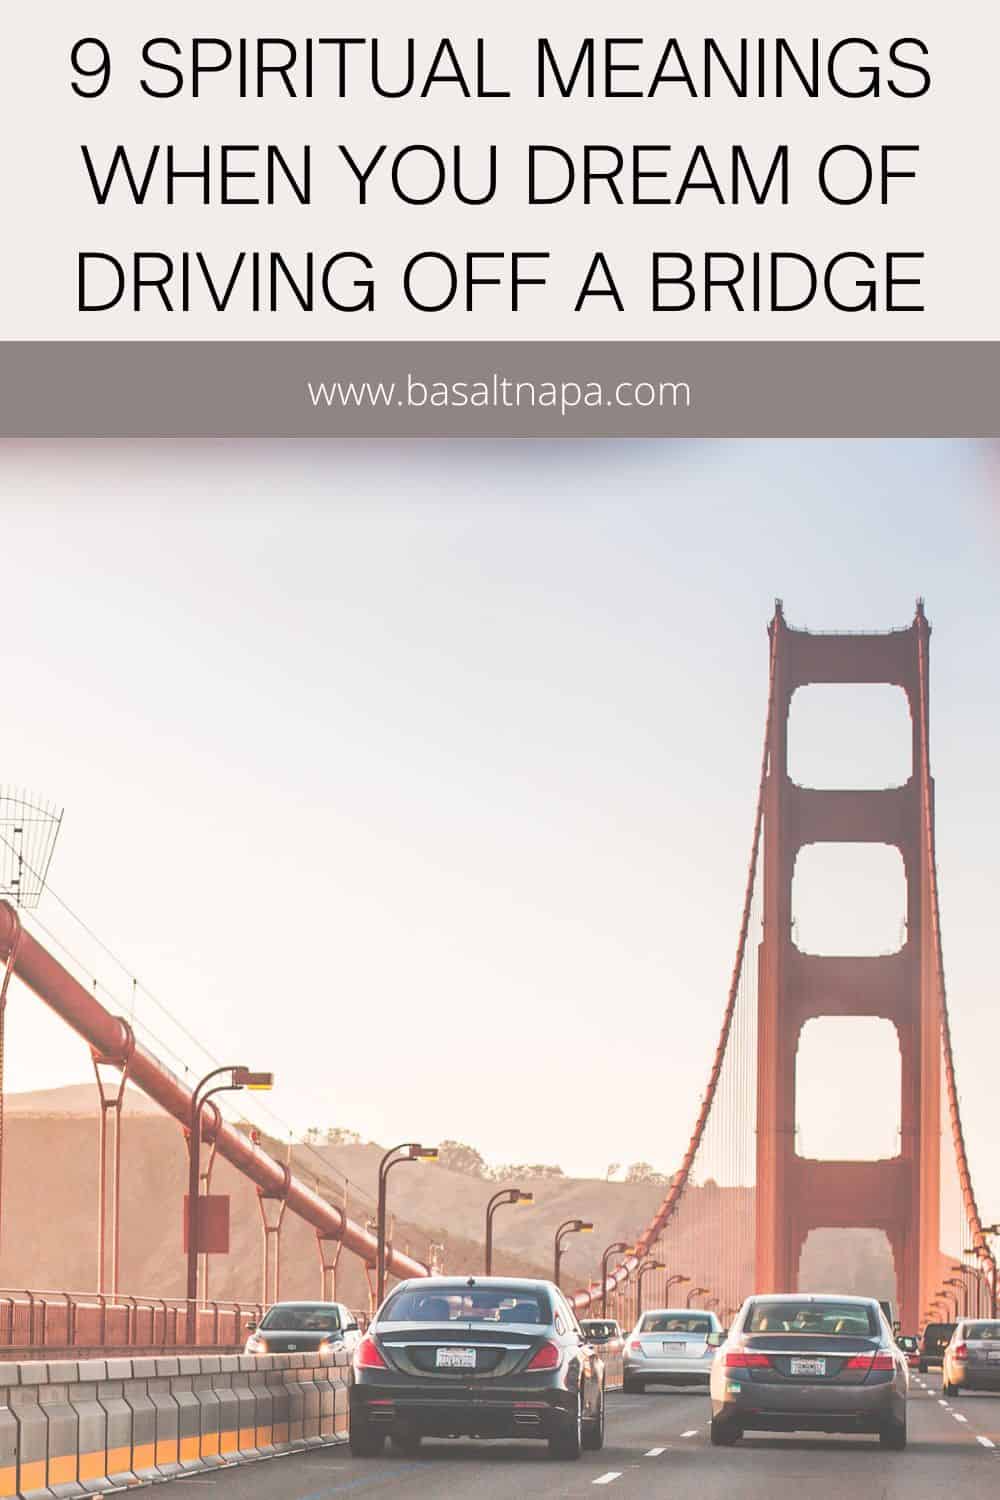 9 Spiritual Meanings When You Dream Of Driving Off A Bridge